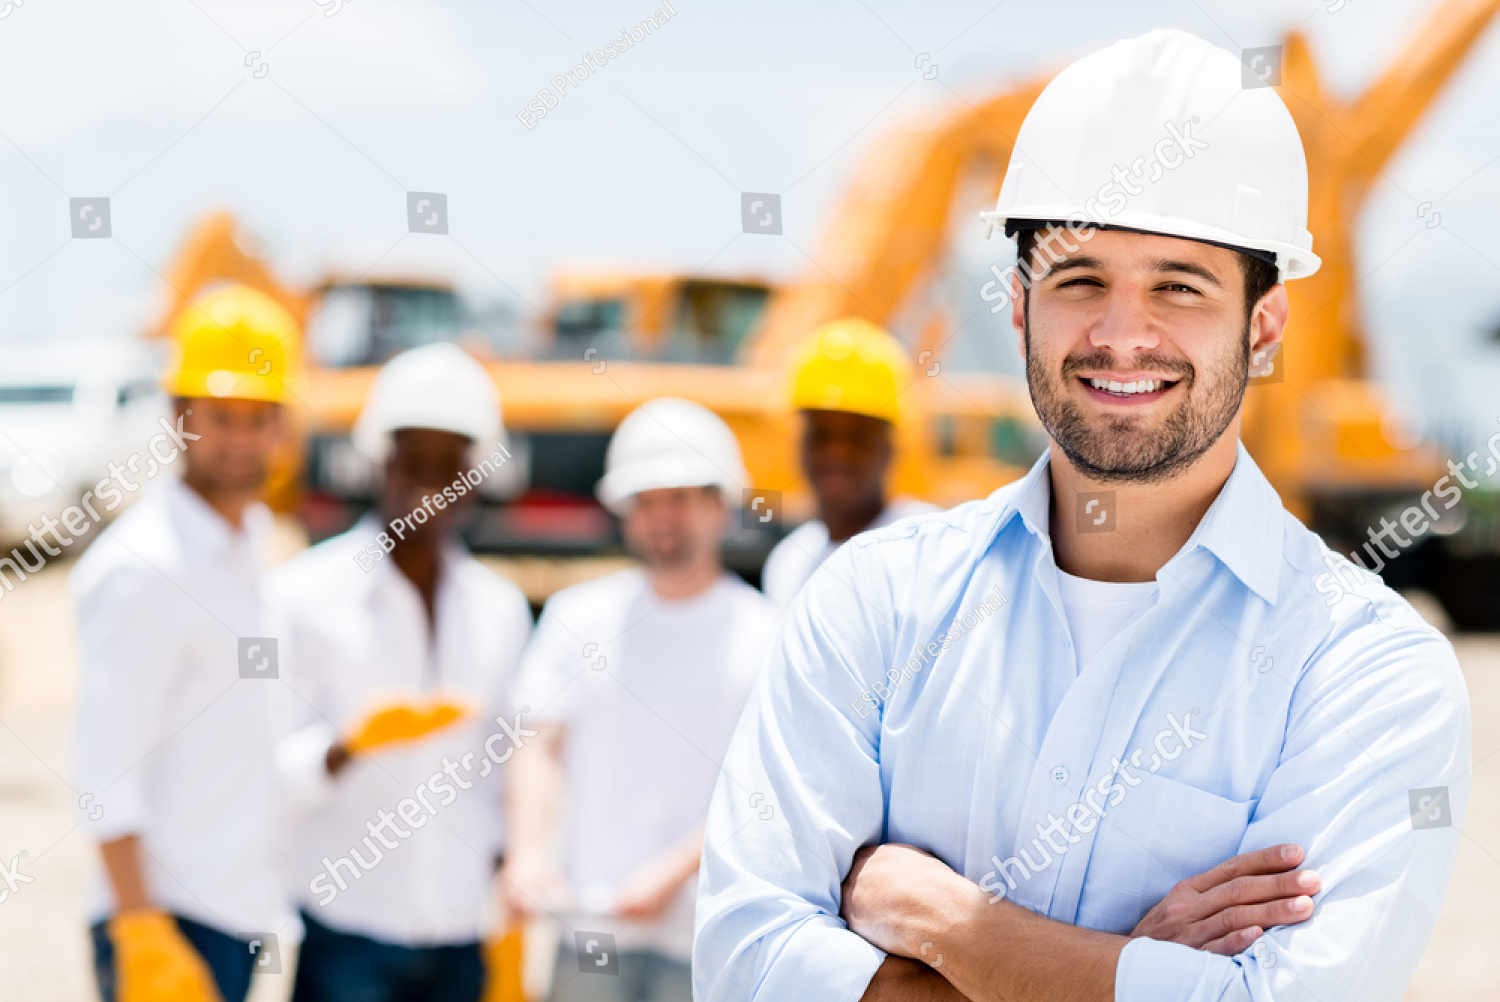 stock-photo-successful-male-architect-at-a-building-site-with-arms-crossed-150120215